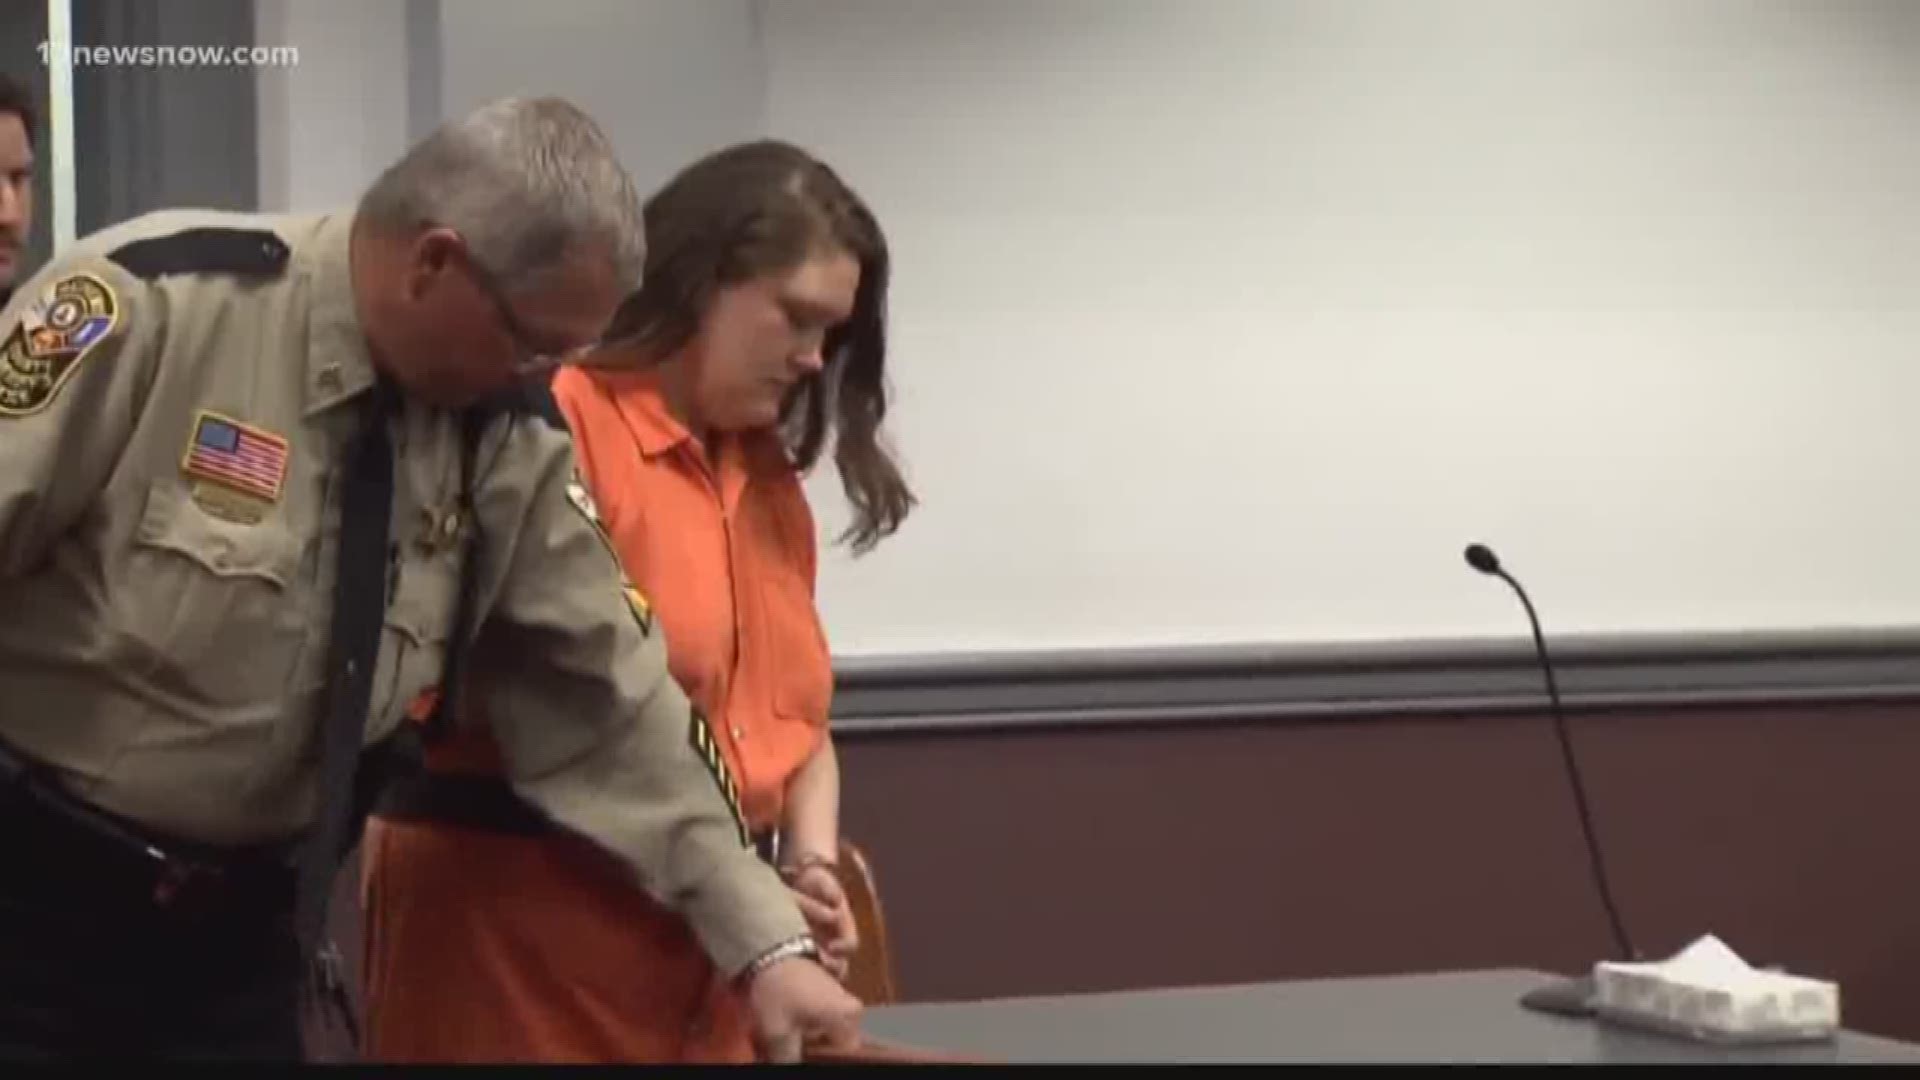 The mother, Miranda Gilbert, was in court and charged with homicide and child abuse.